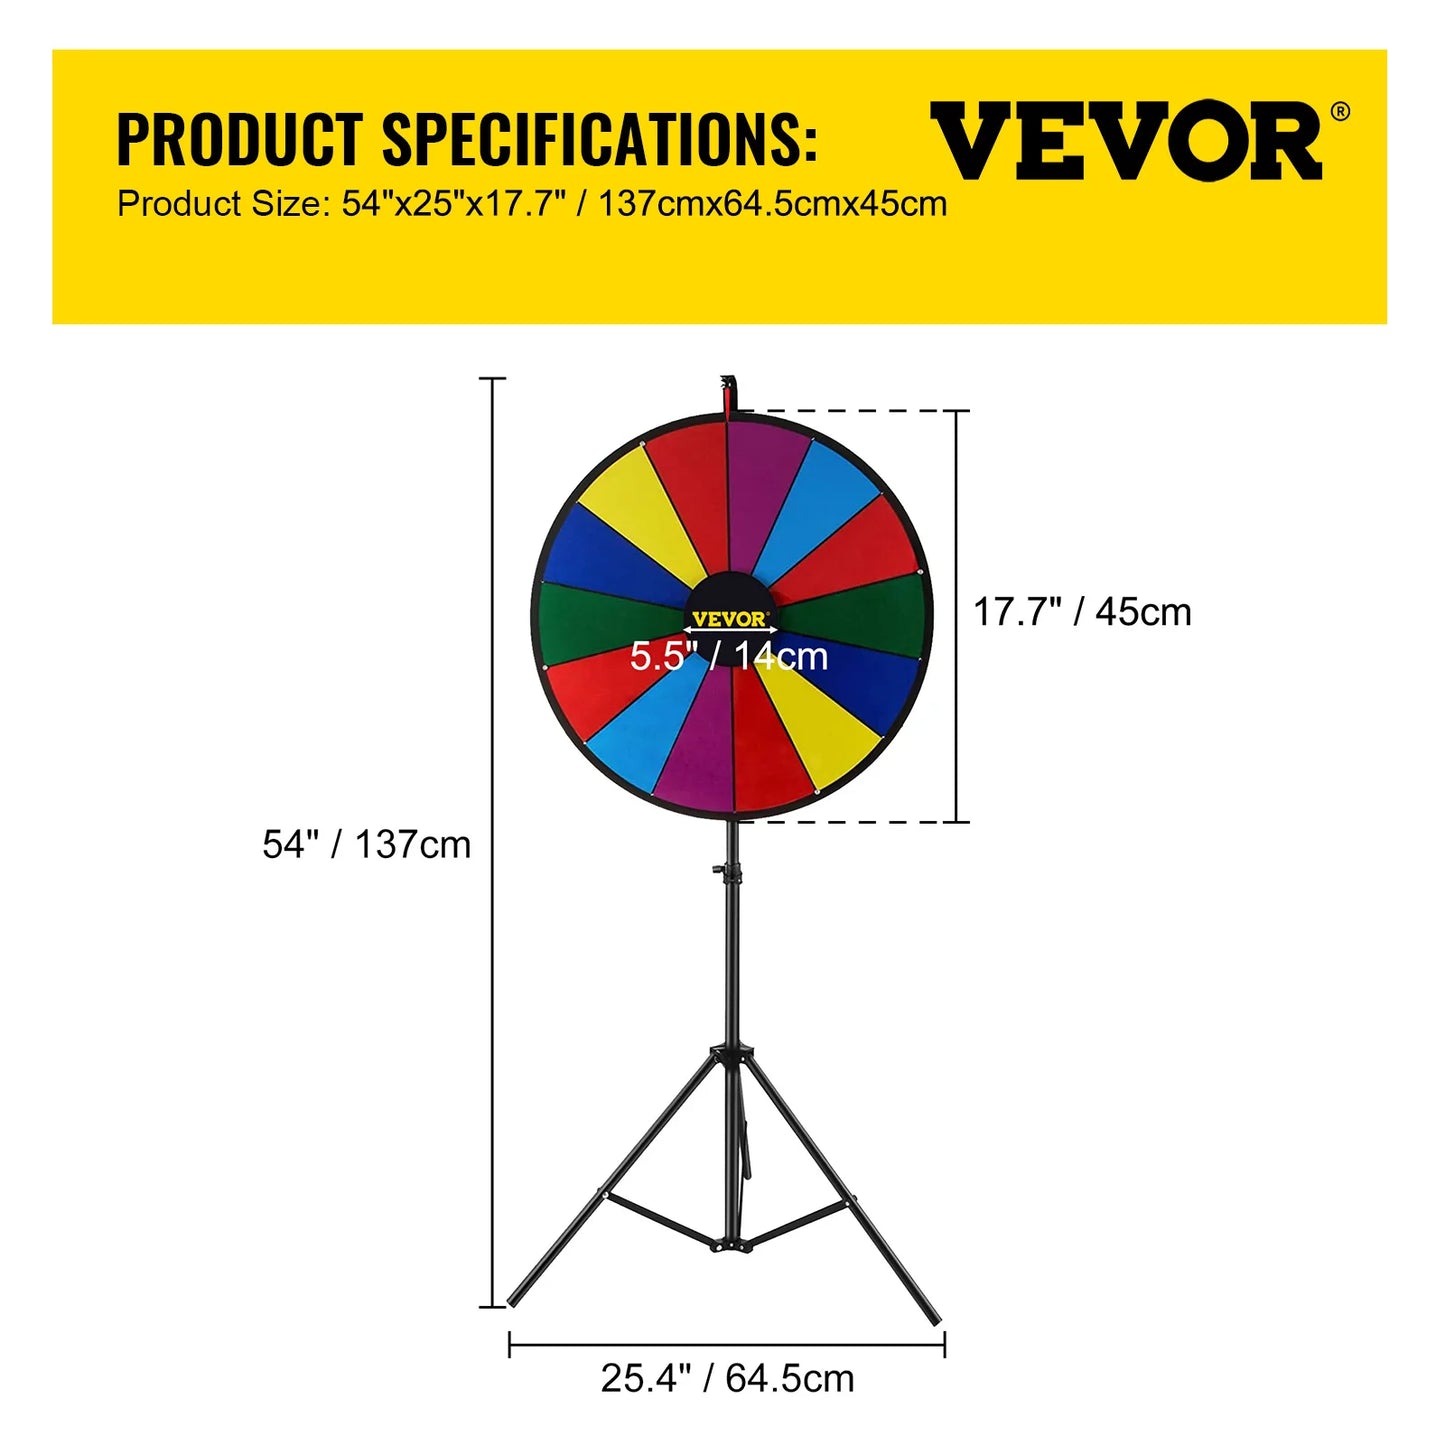 VEVOR 18 Inch Tabletop Color Prize Wheel with Folding Tripod Floor Stand 14 Slots